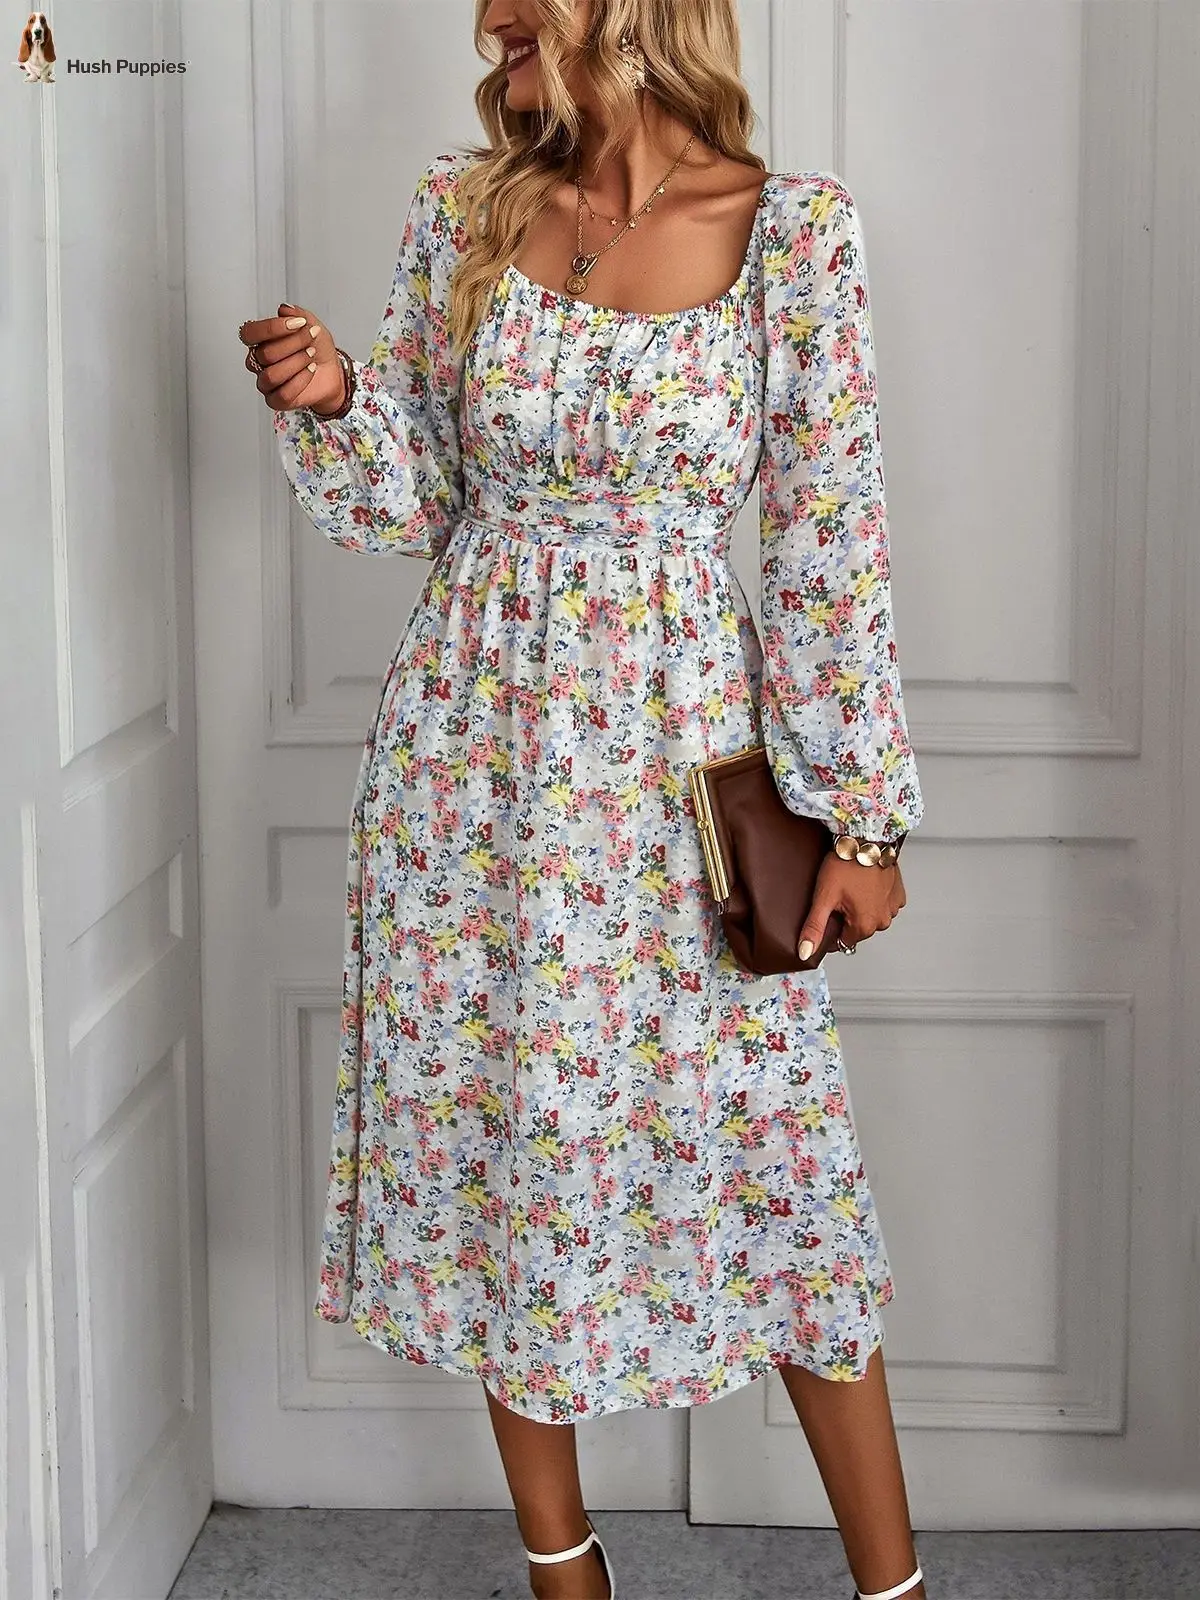 

Hush Puppies Bohemia Floral Print Full Sleeve Women Dress Casual Square Collar Dress Women Vintage Sundress Fashion Outfits